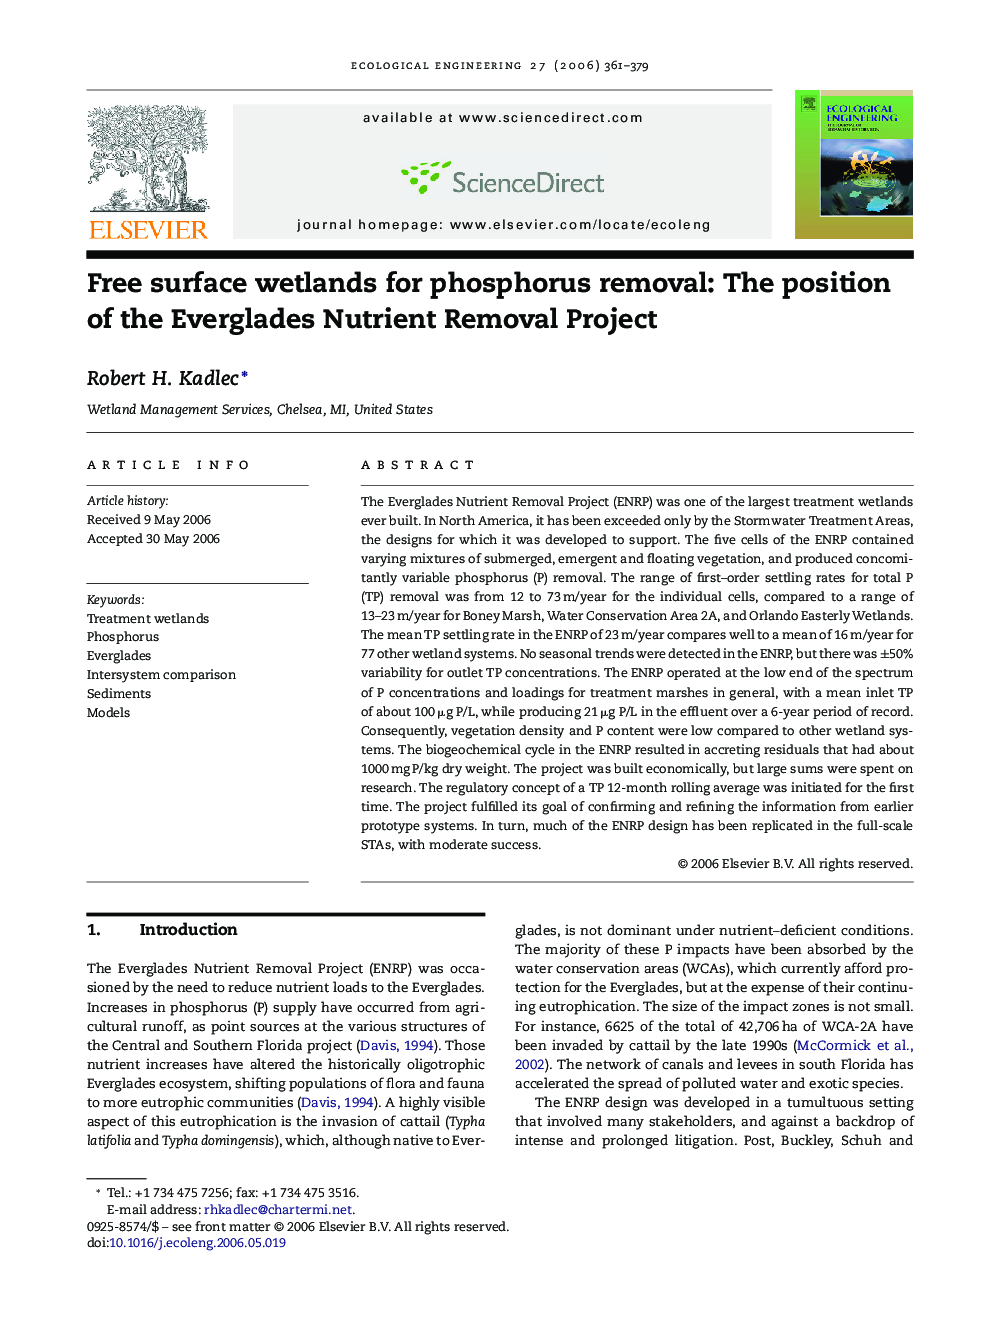 Free surface wetlands for phosphorus removal: The position of the Everglades Nutrient Removal Project